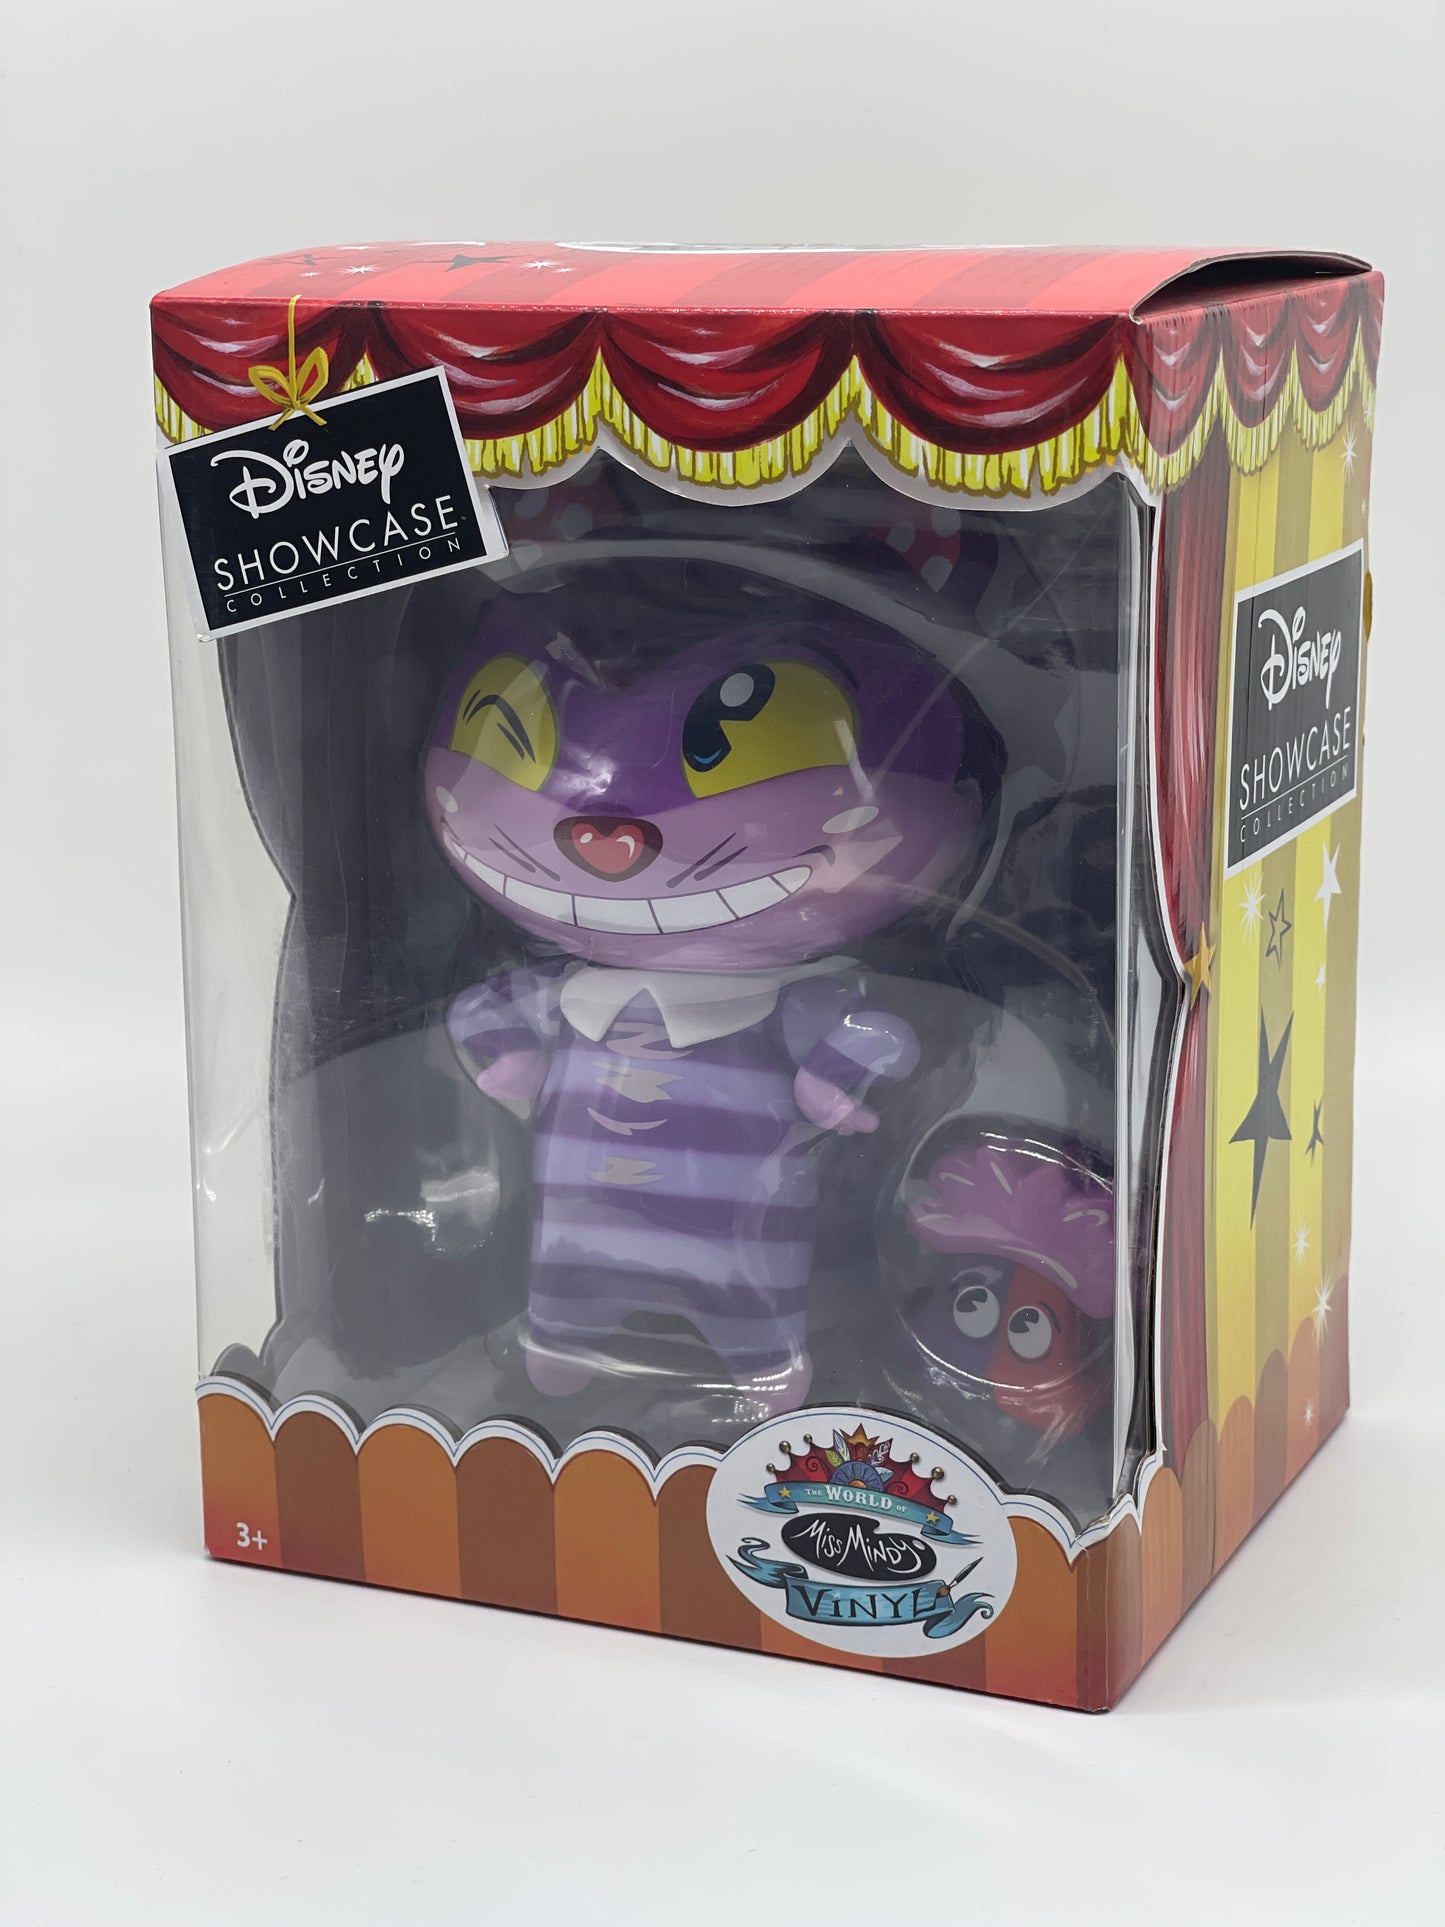 Disney Showcase Collection "Cheshire Cat" Cheshire The World of Miss Mindy Vinyl 